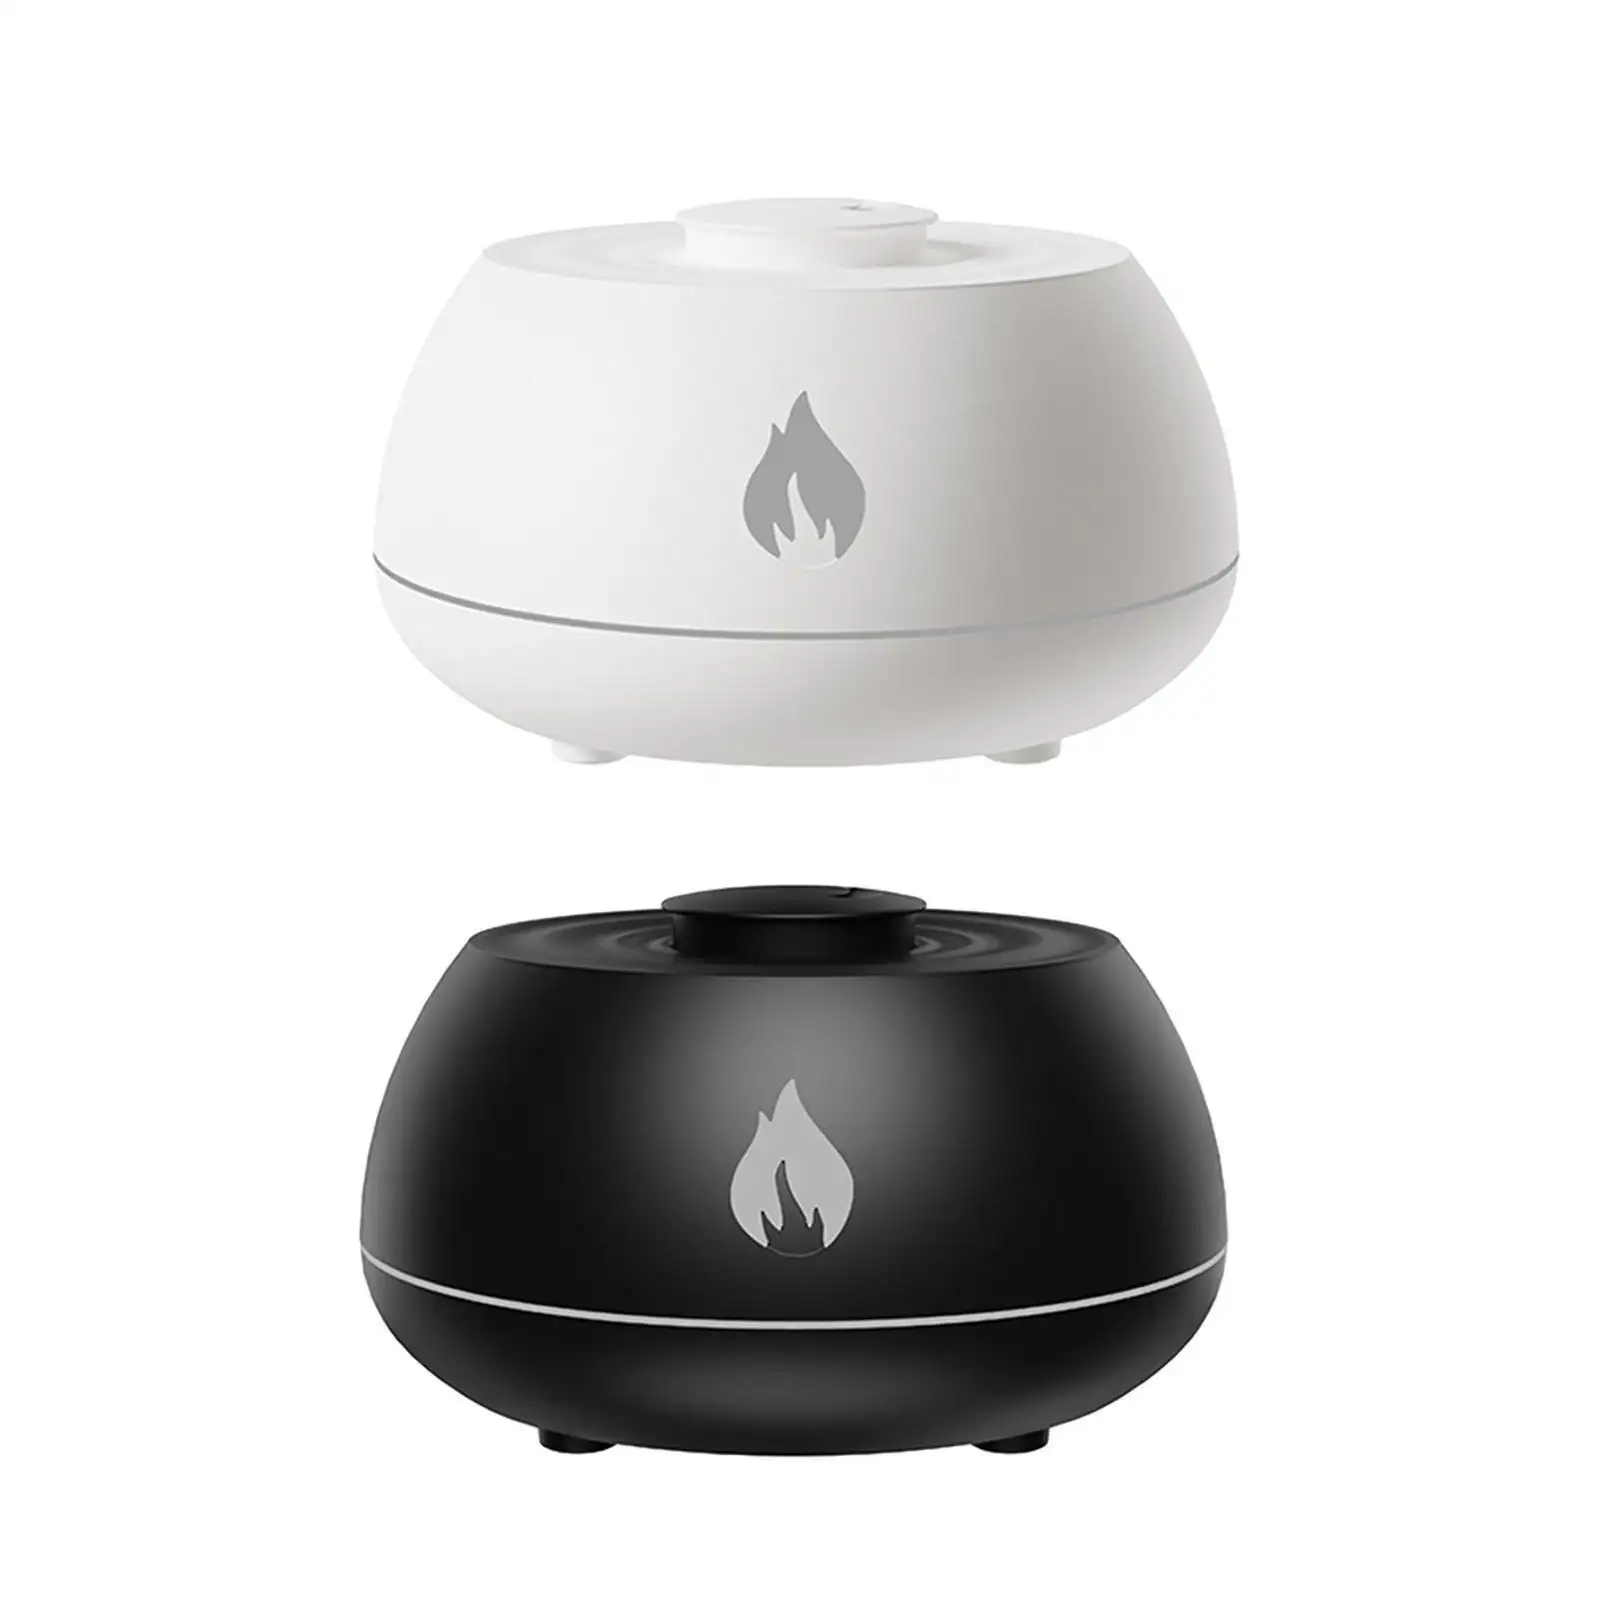 Essential Oils Scent Ultrasonic Mist Led Simulation 3D Blue Fire Flame Effect Air Humidifiers Aroma Diffusers